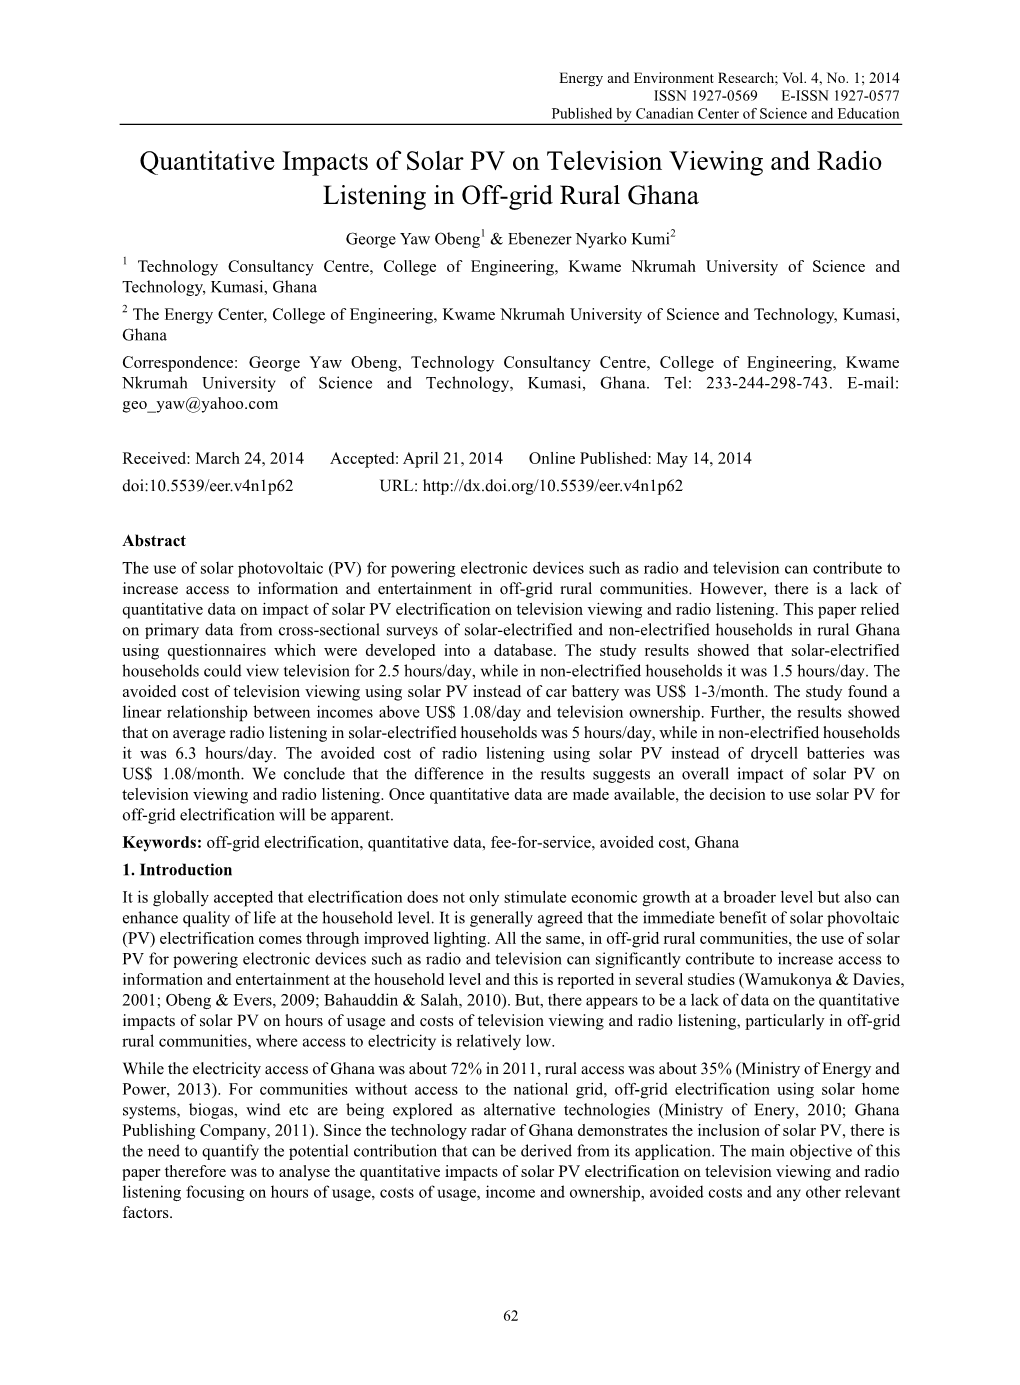 Quantitative Impacts of Solar PV on Television Viewing and Radio Listening in Off-Grid Rural Ghana